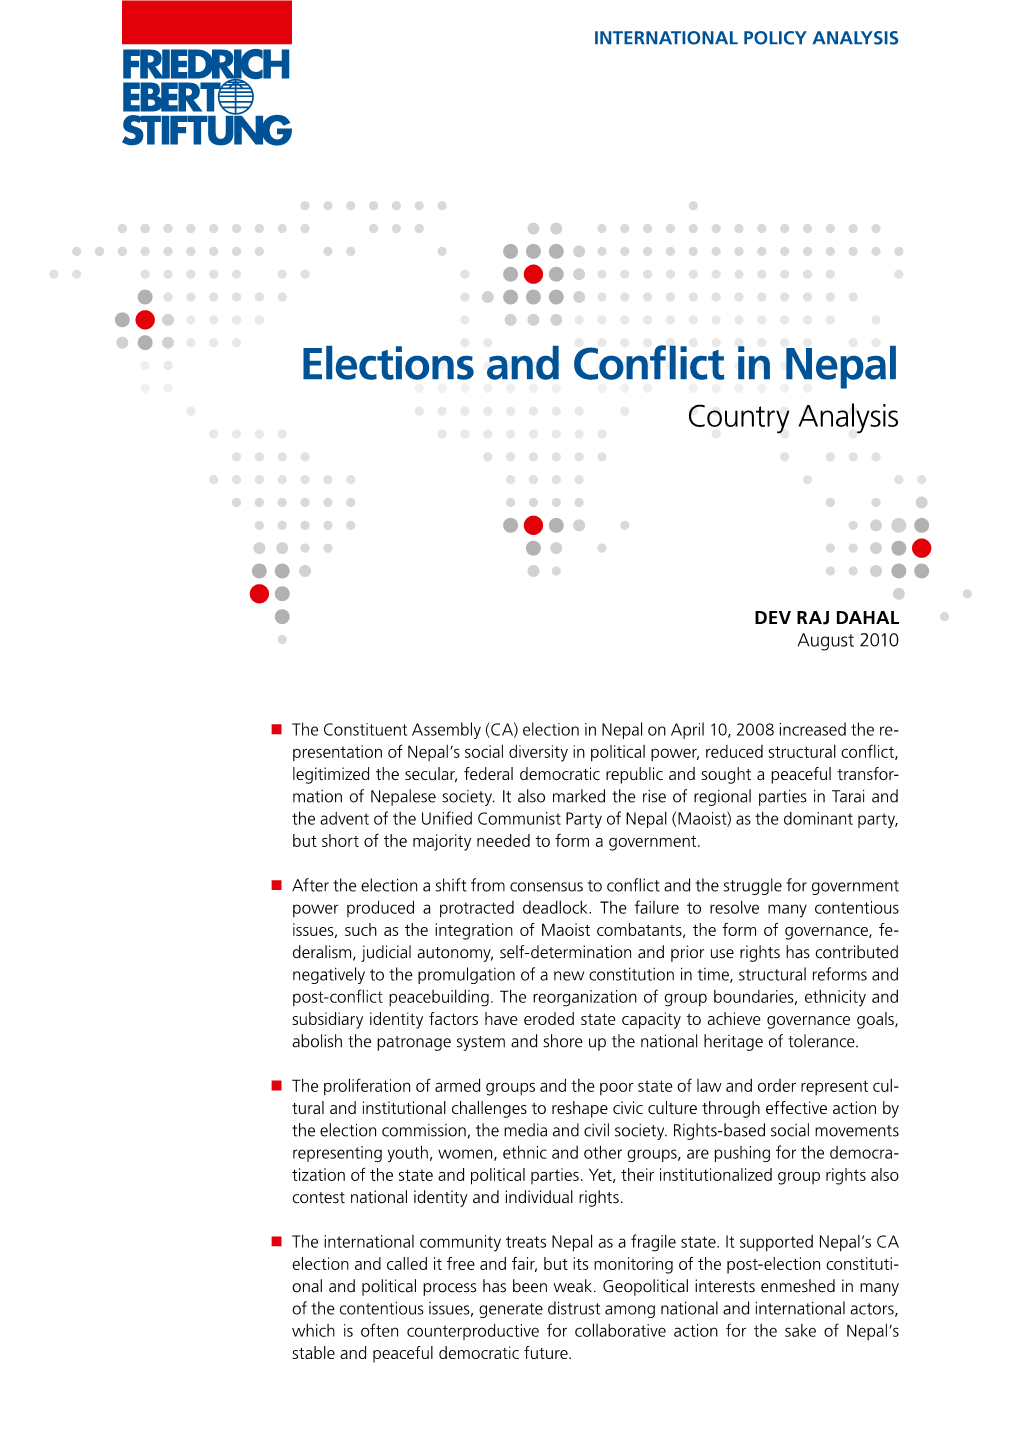 Elections and Conflict in Nepal Country Analysis